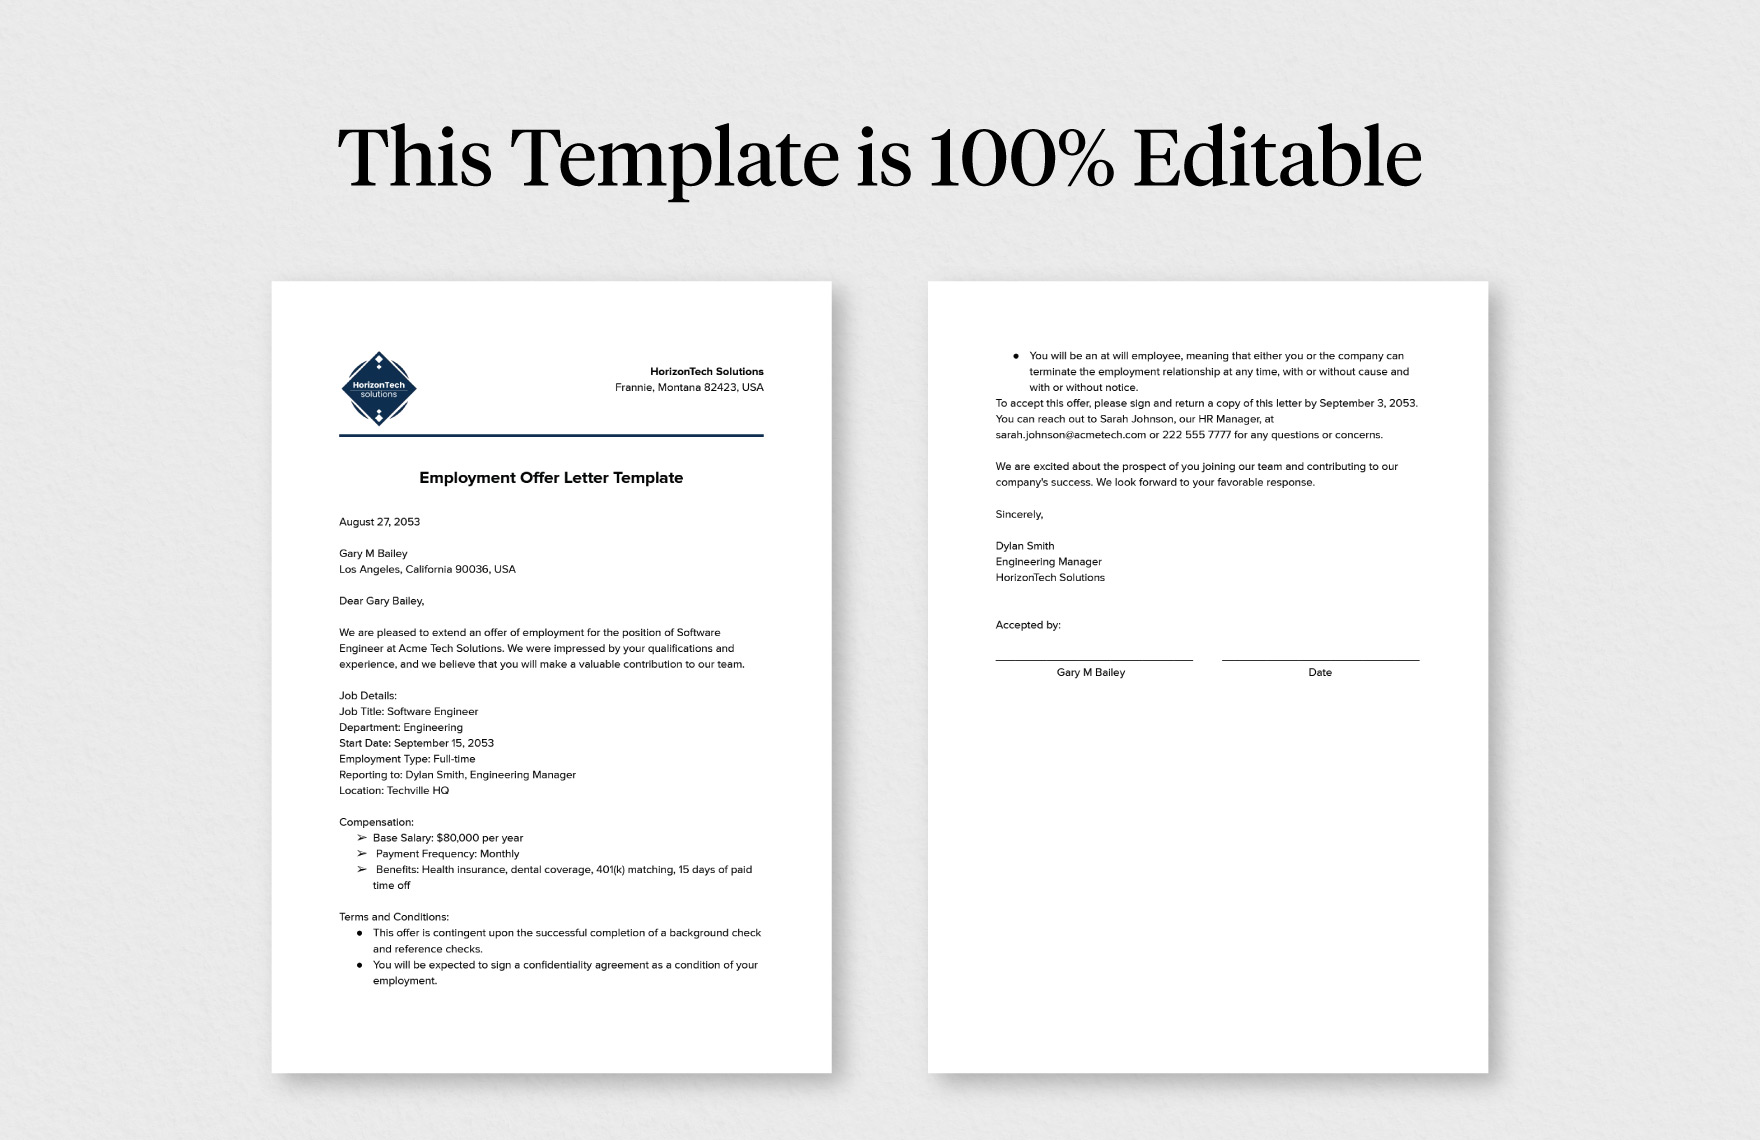 Employment Offer Letter Template